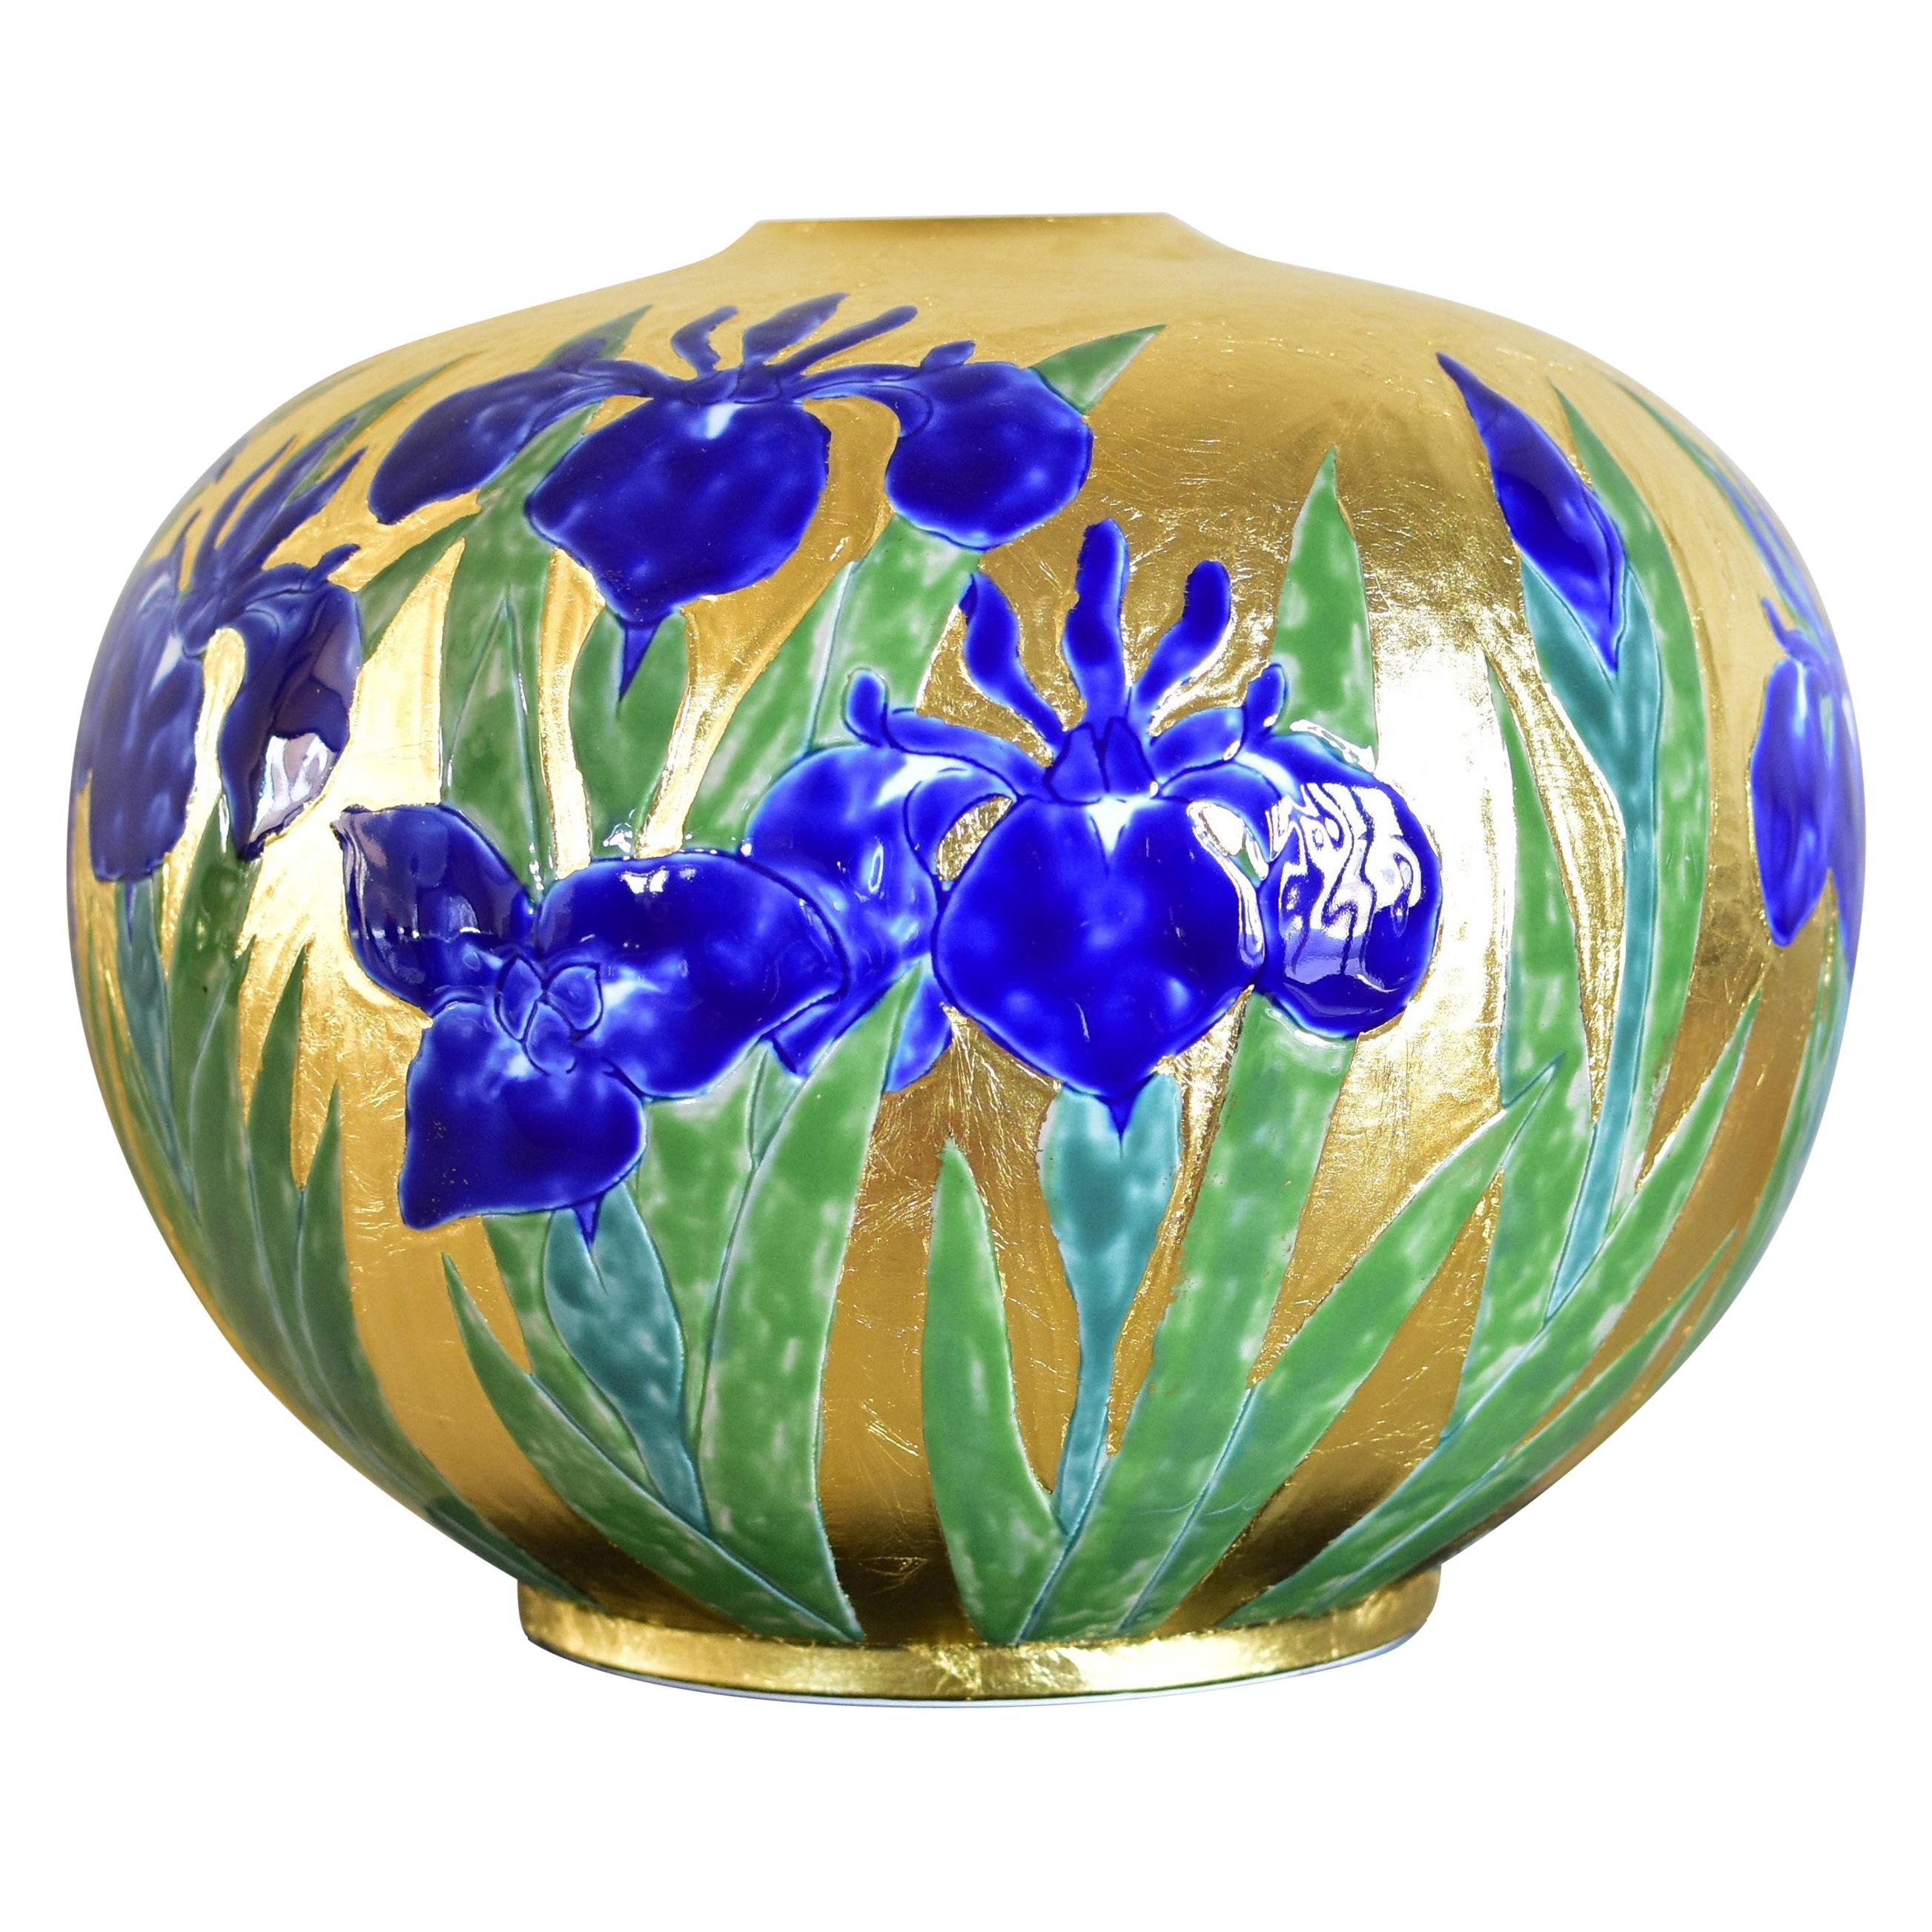 Exquisite Japanese contemporary porcelain vase in gold leaf decorated withhand-paintings in deep blue and beautiful shades of green on a stunningly shaped body. This piece is by a third generation master of a kiln located in the Imari-Arita region